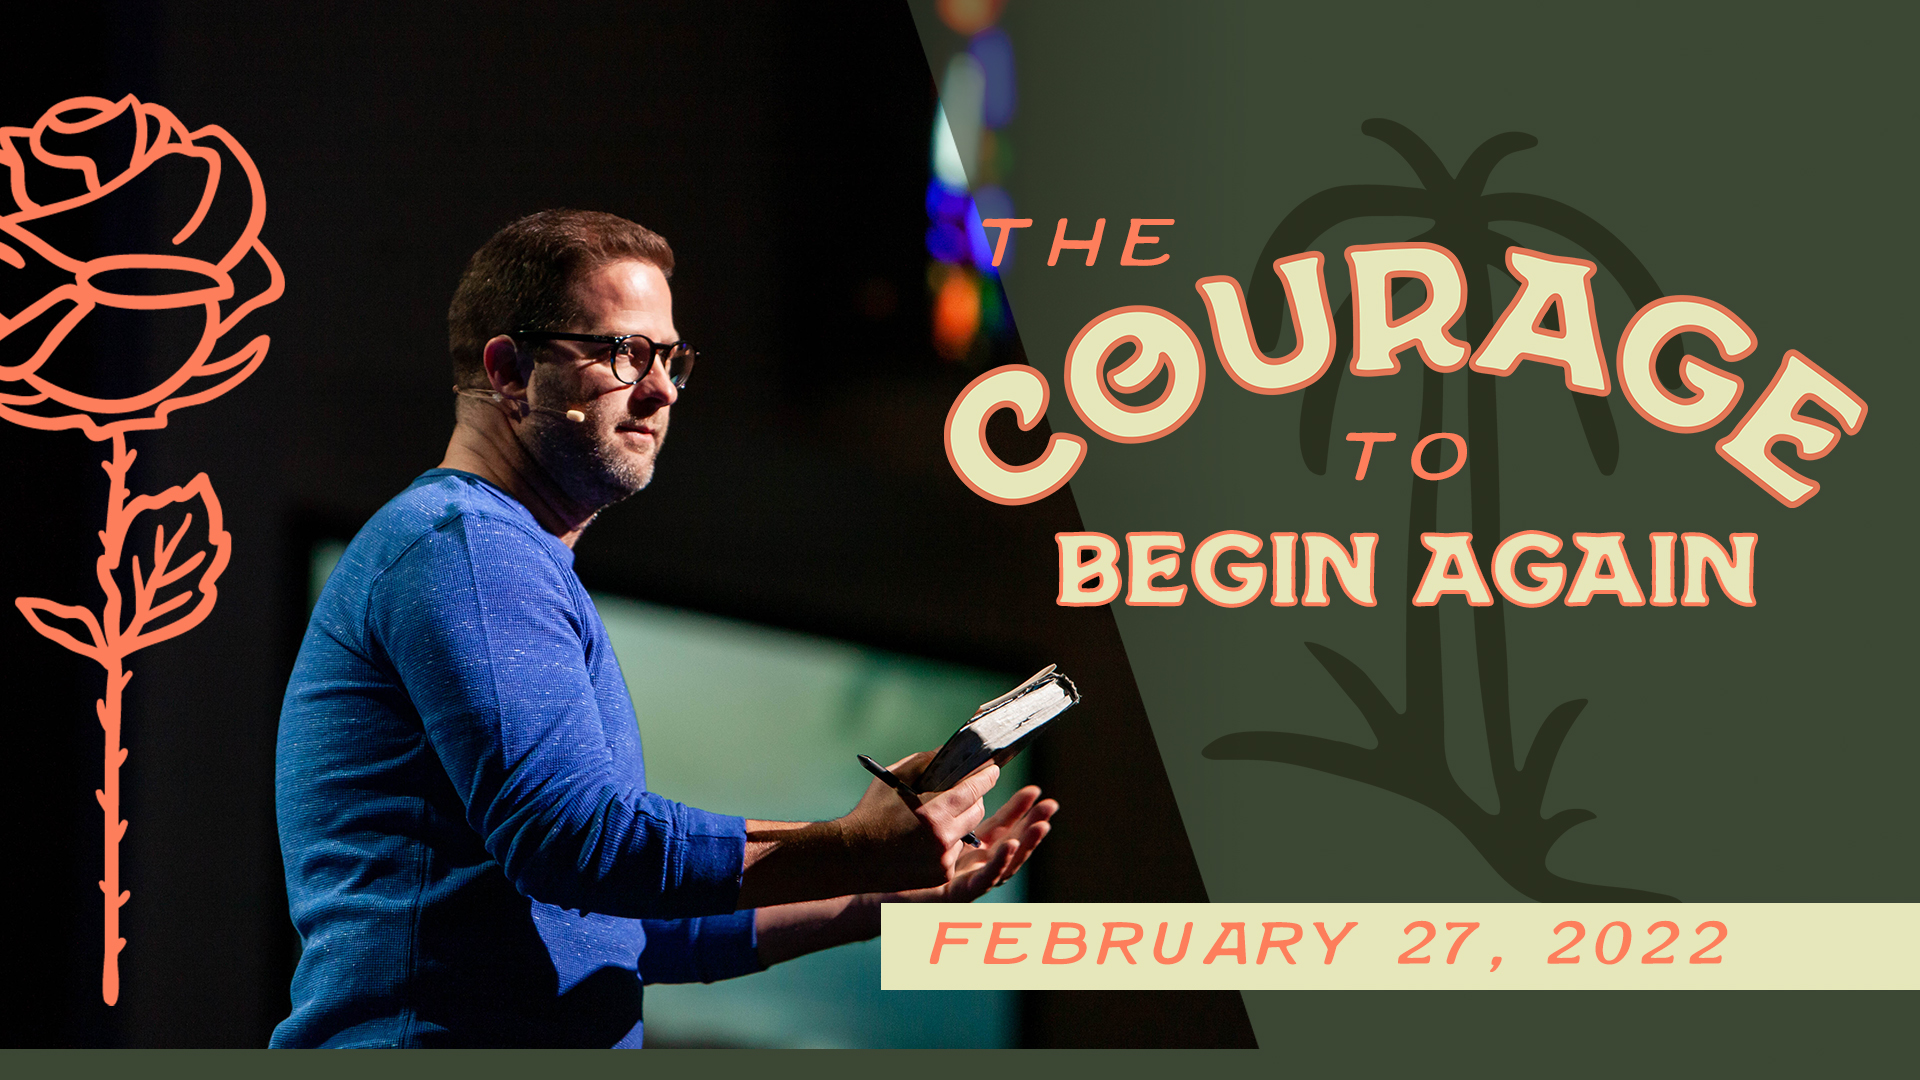 Courage to Begin Again